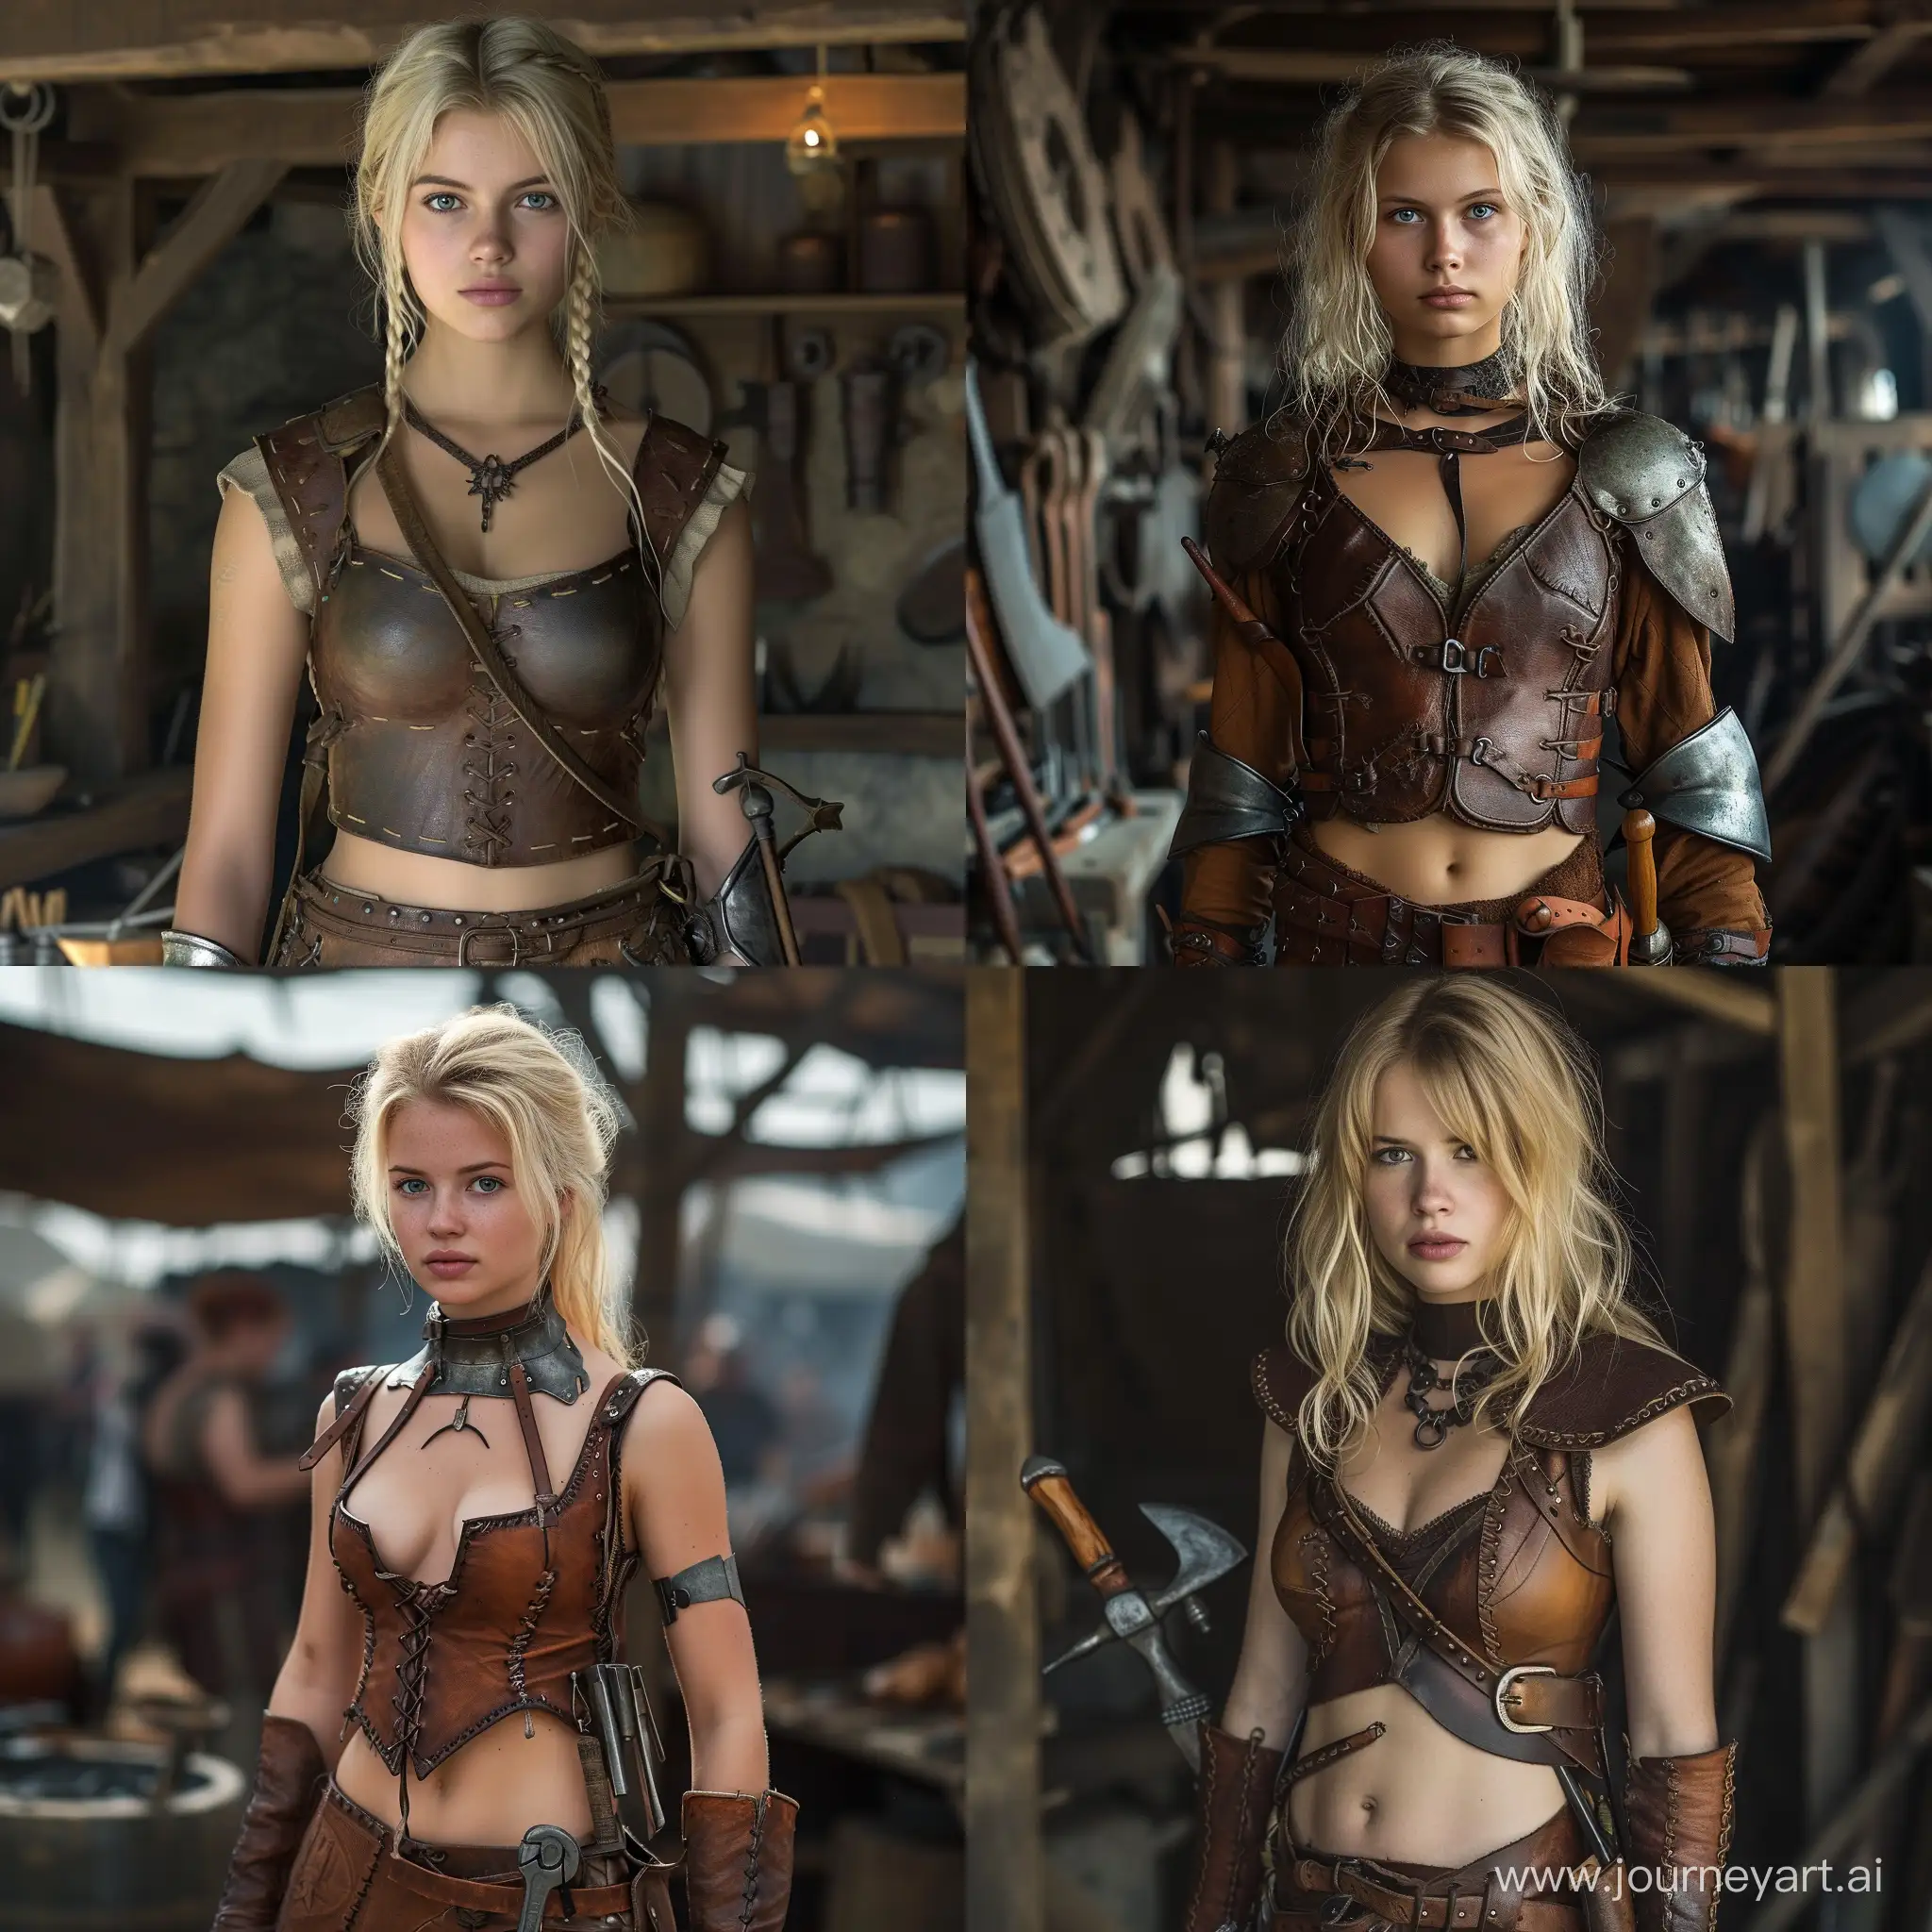 Young looking Blond girl, thin, small breasts, Leather armor, smithing tools on hip, 1.50 meters tall